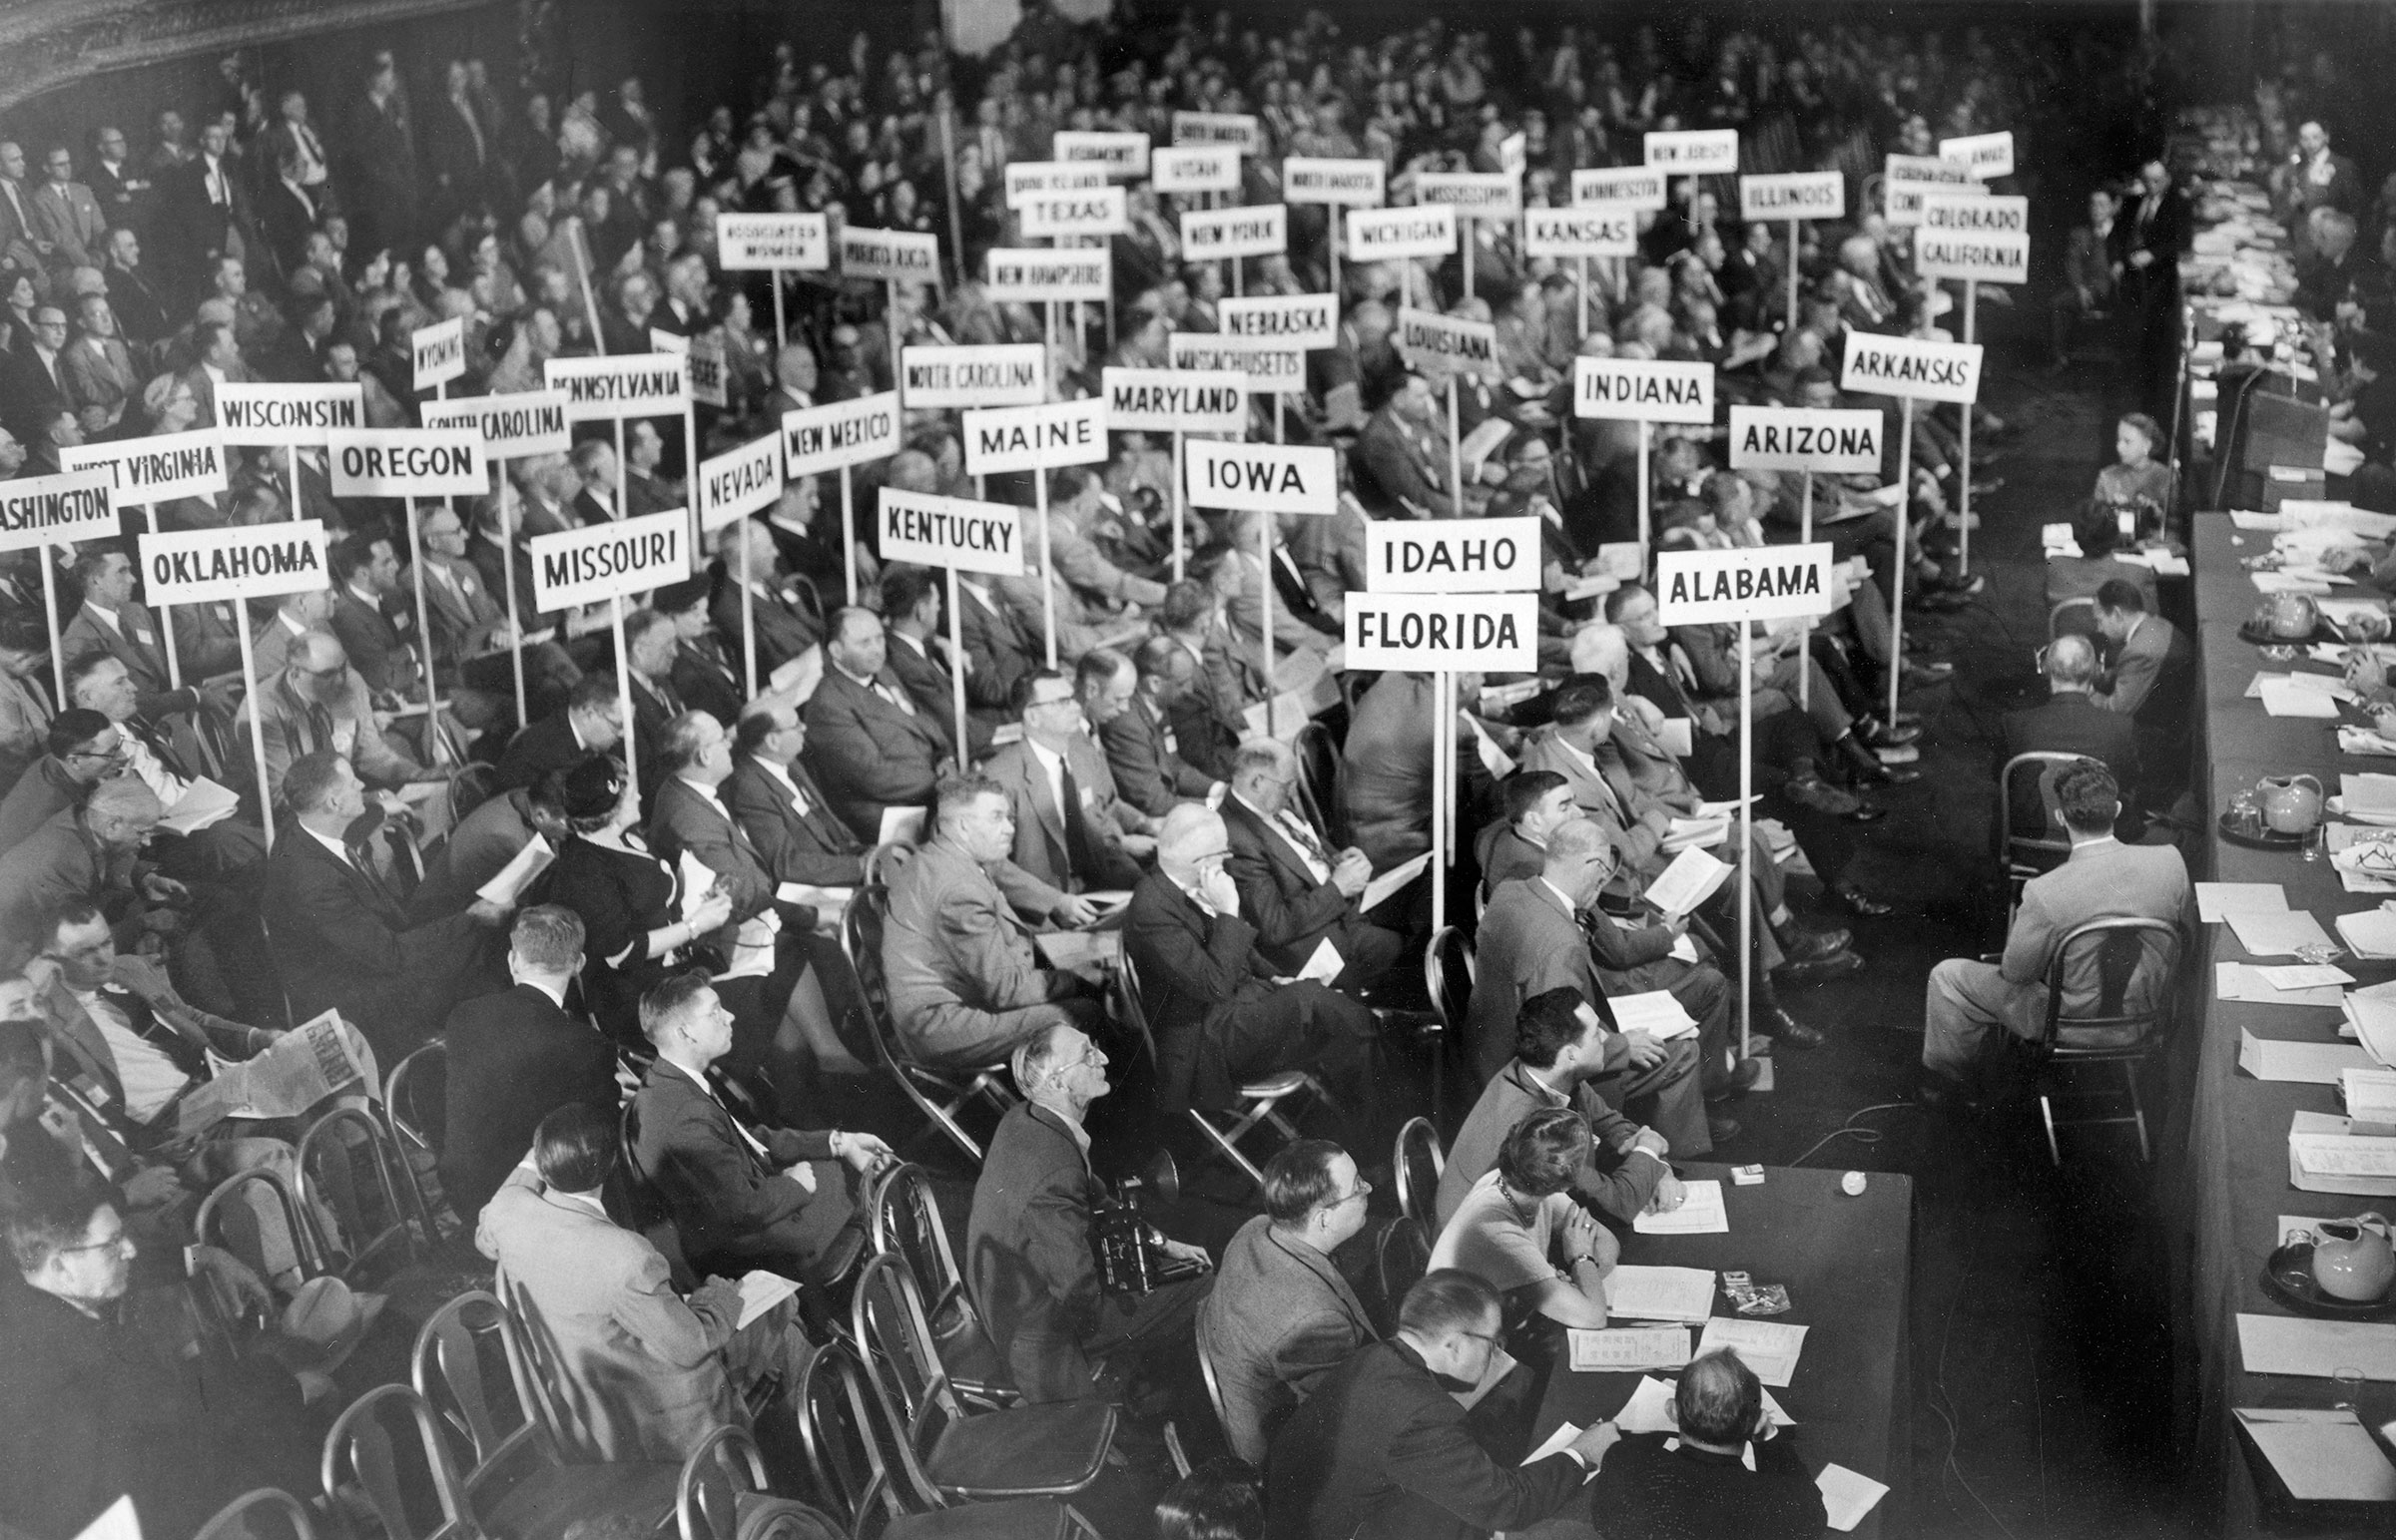 Voting delegates from 48 states and Puerto Rico consider the resolutions that determine the policies of the American Farm Bureau Federation for 1954 during the AFBF annual meeting held in New York City. Oklahoma’s delegation is seated in the left foreground.